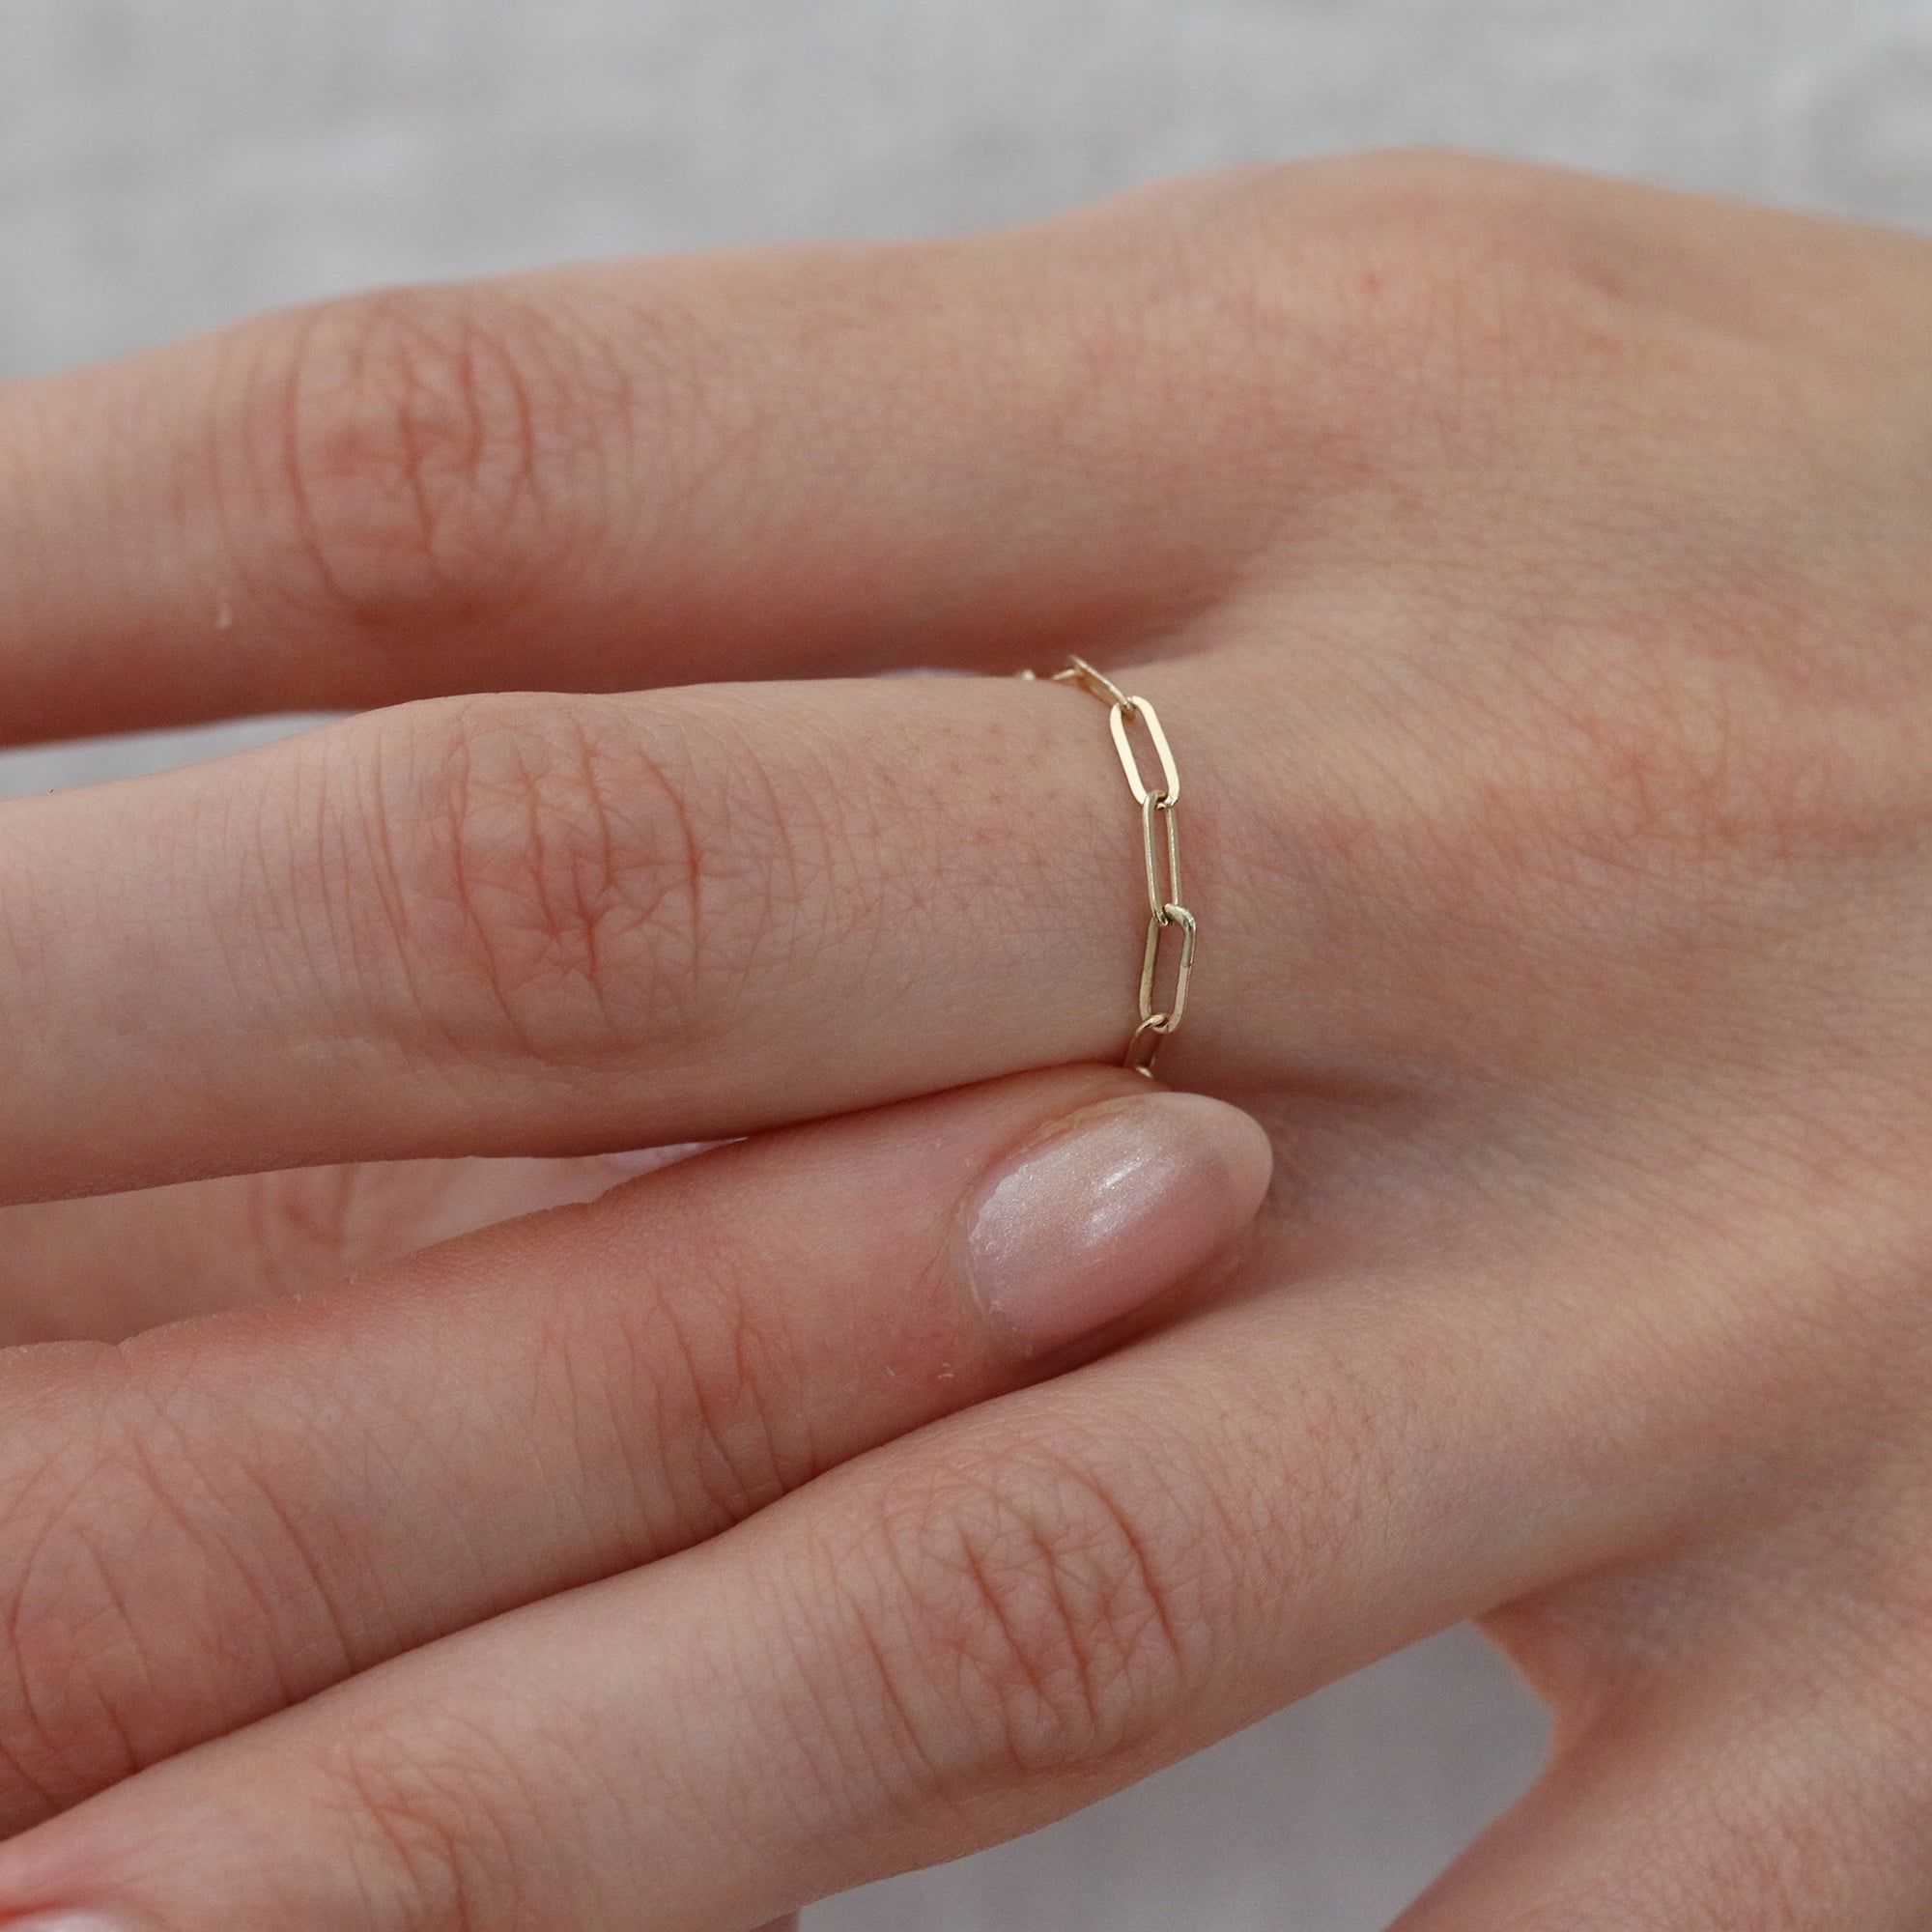 Gold Chain Ring, Double Finger Ring, Two Rings, Stylish Rings, Dainty Gold  Filled Ring, Dangle Hamsa Ring, Double Chain Ring,adjustable Ring - Etsy |  Double finger ring, Stylish rings, Gold filled ring